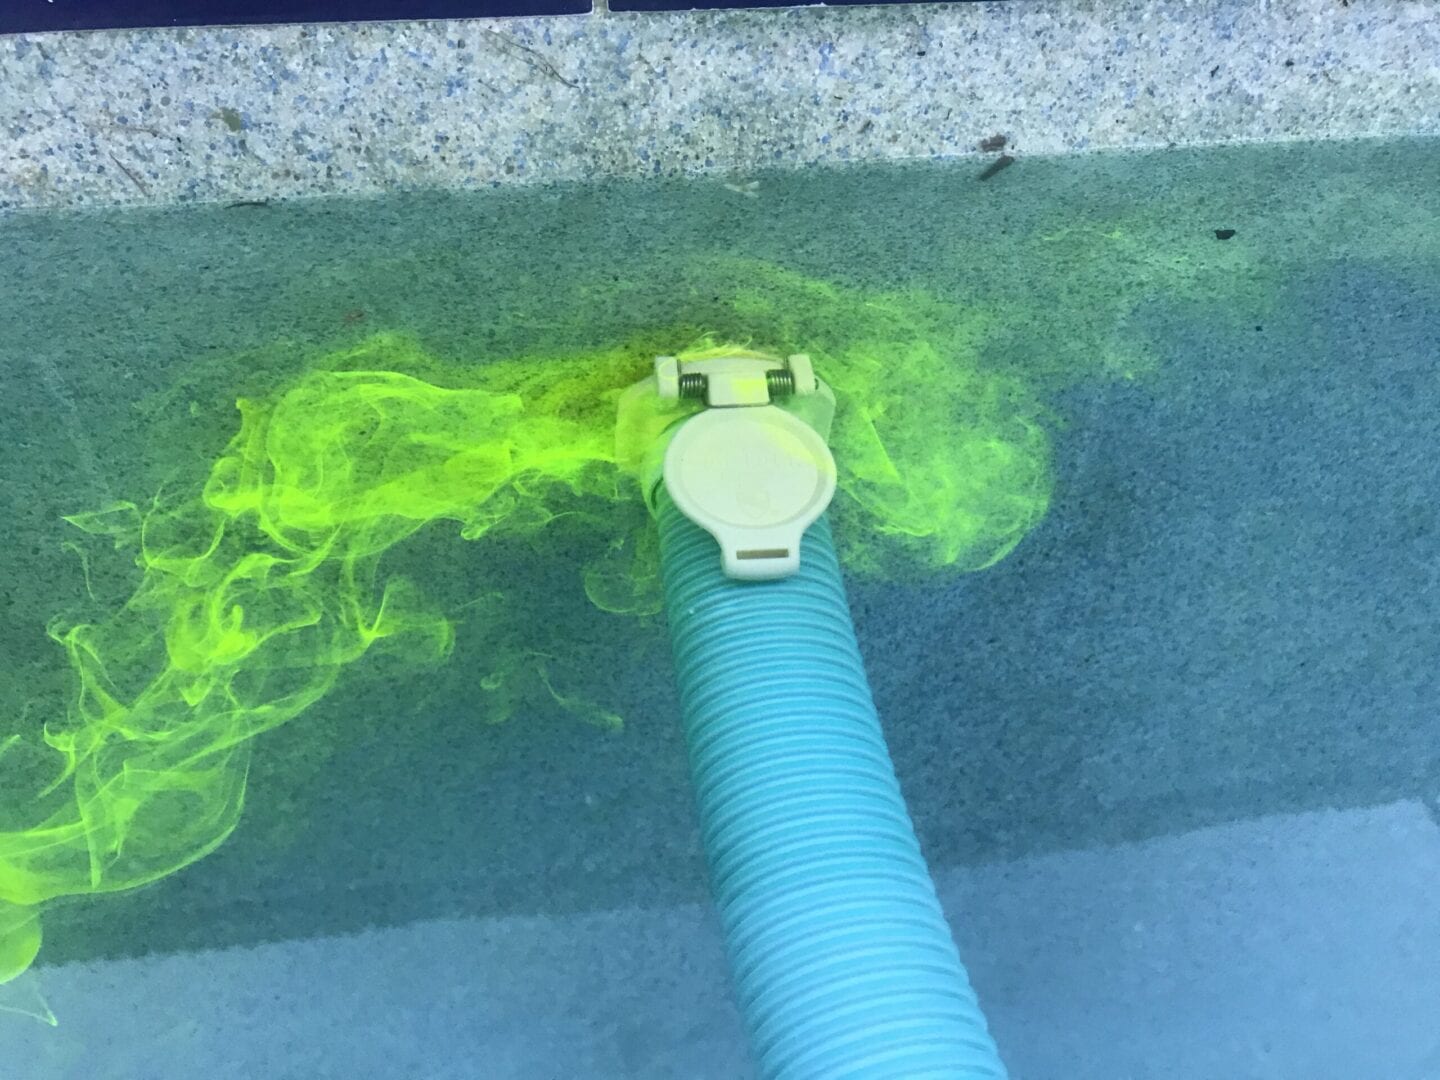 Yellow liquid swirling around a pipe in the pool